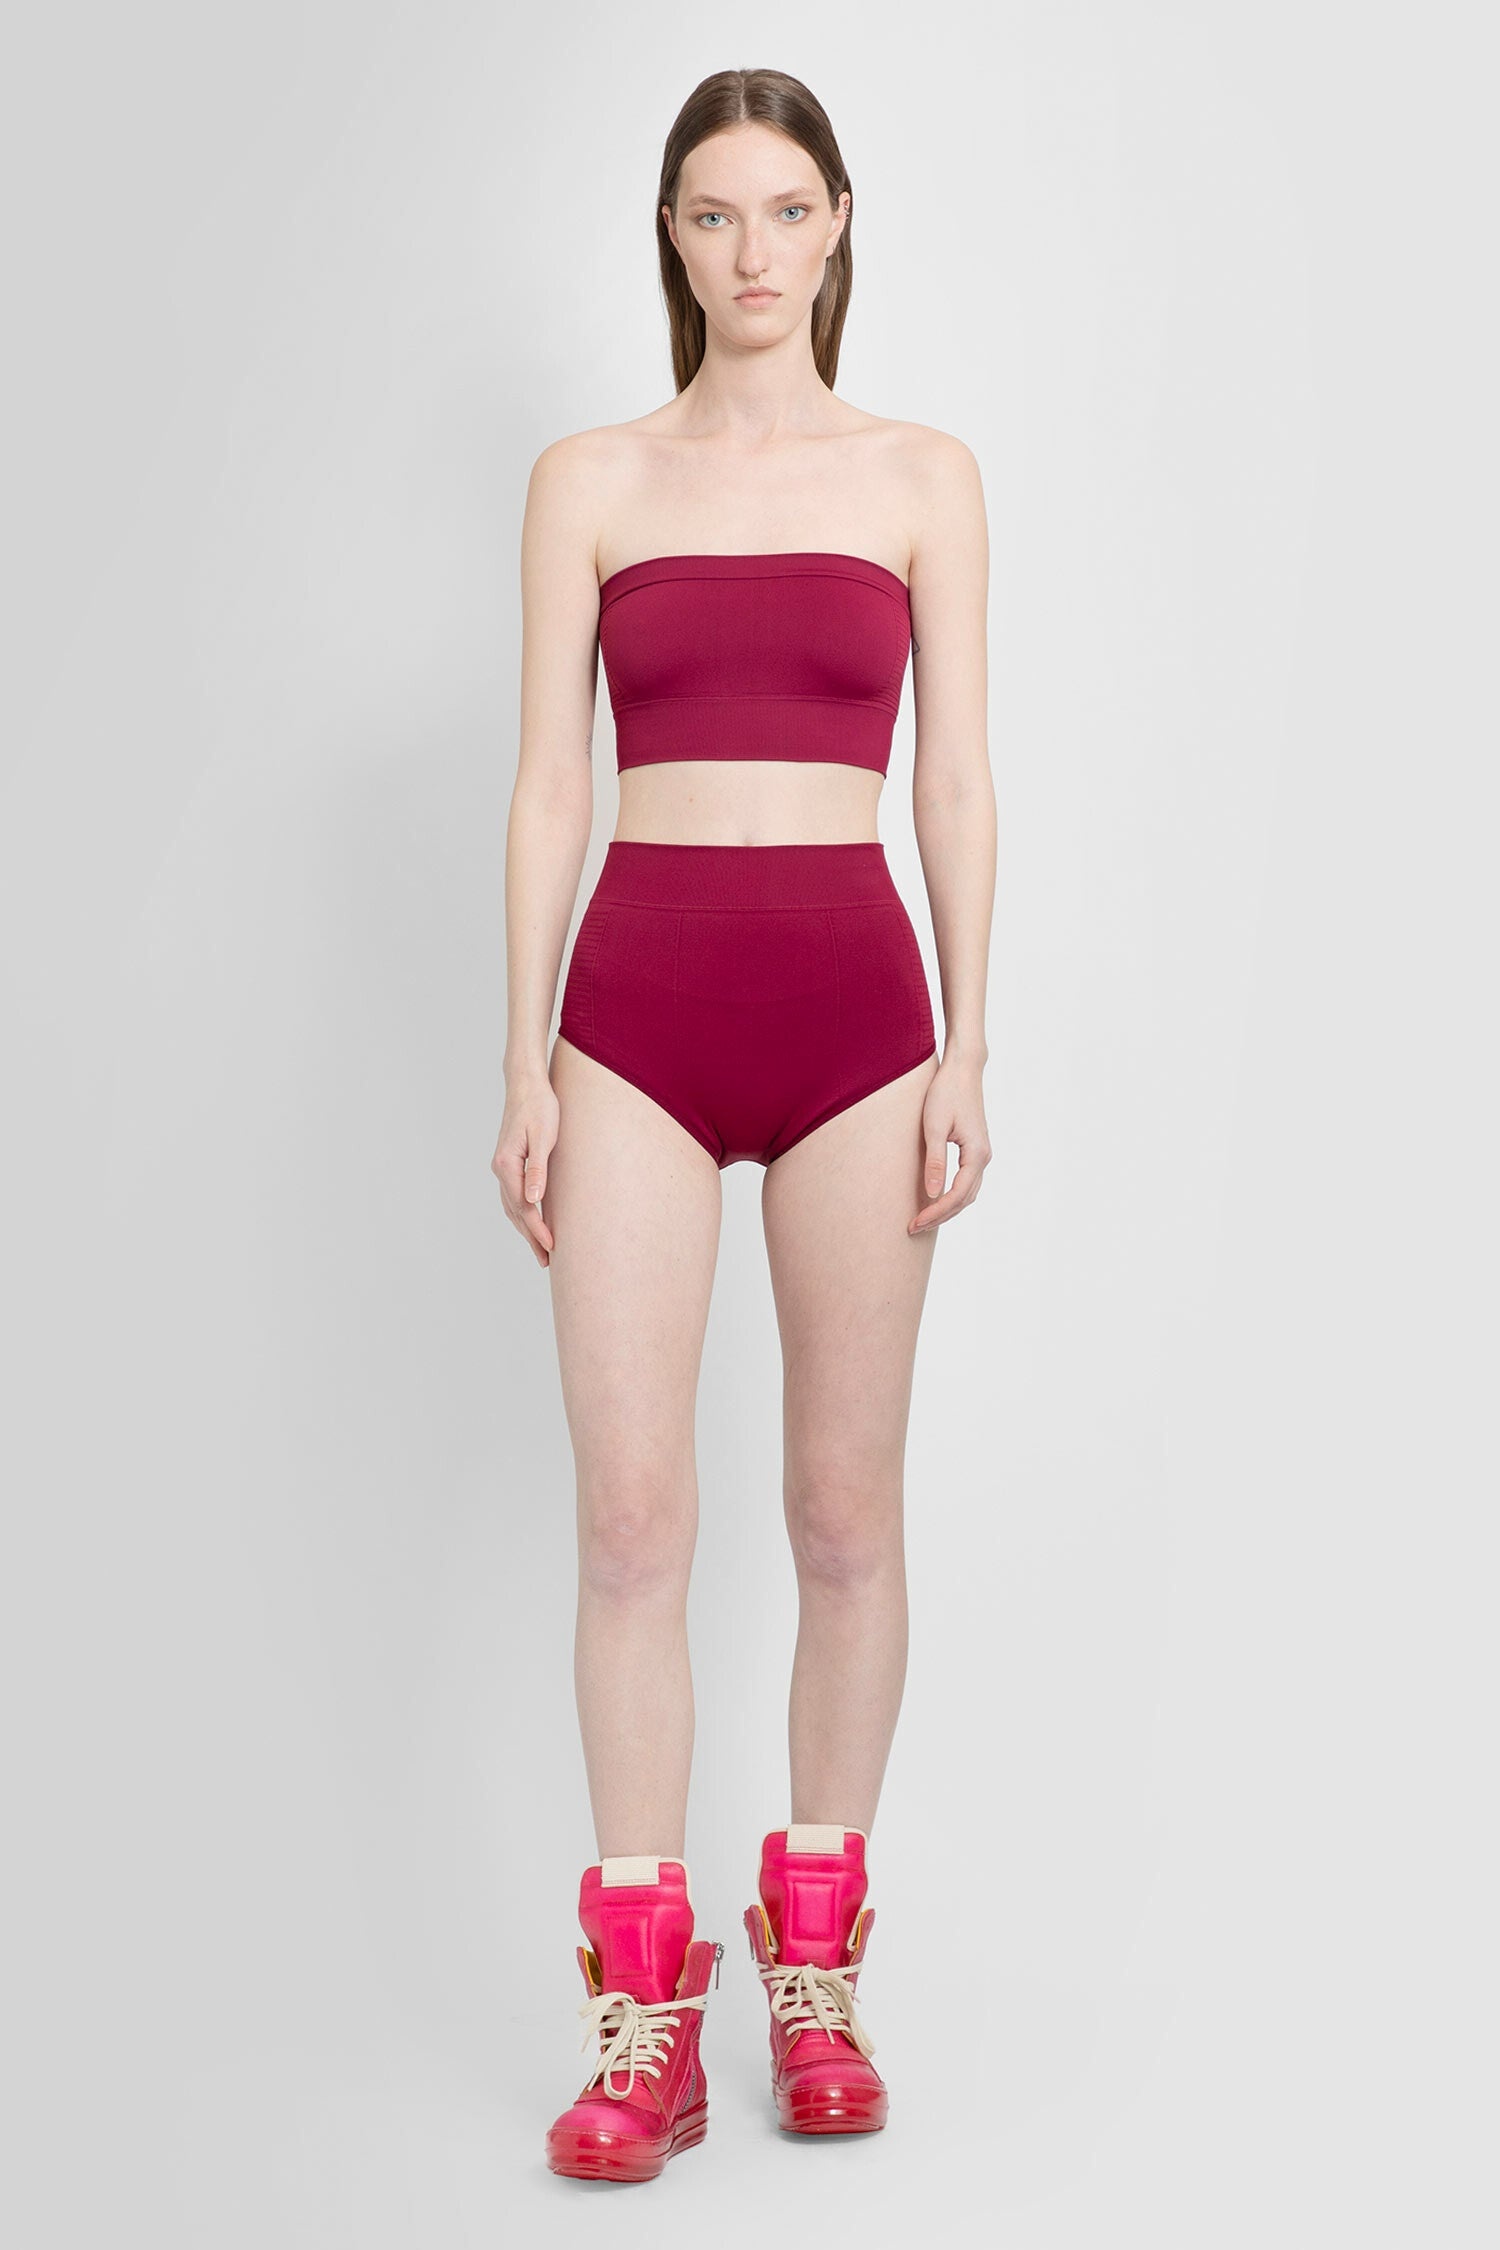 RICK OWENS WOMAN RED LINGERIE - 5